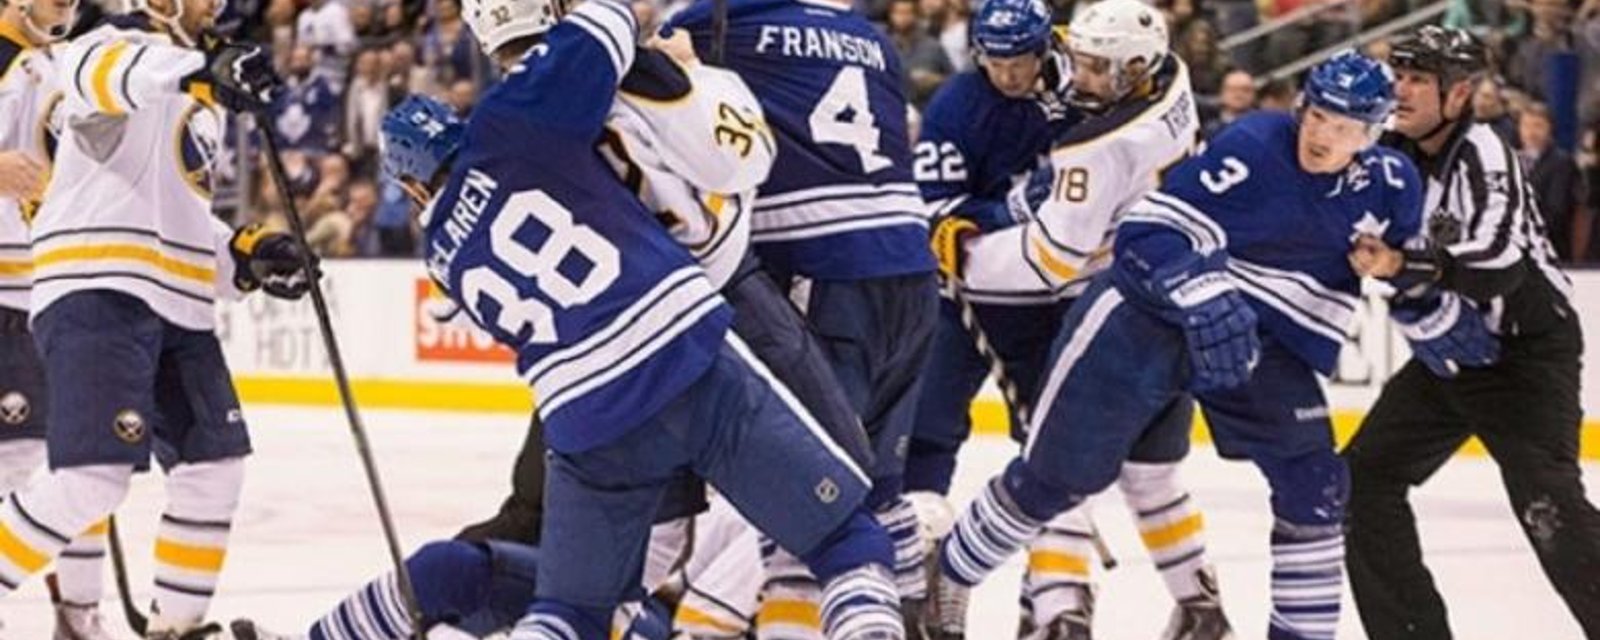 Returning Leafs lead the charge in 6-4 win over Sabres.